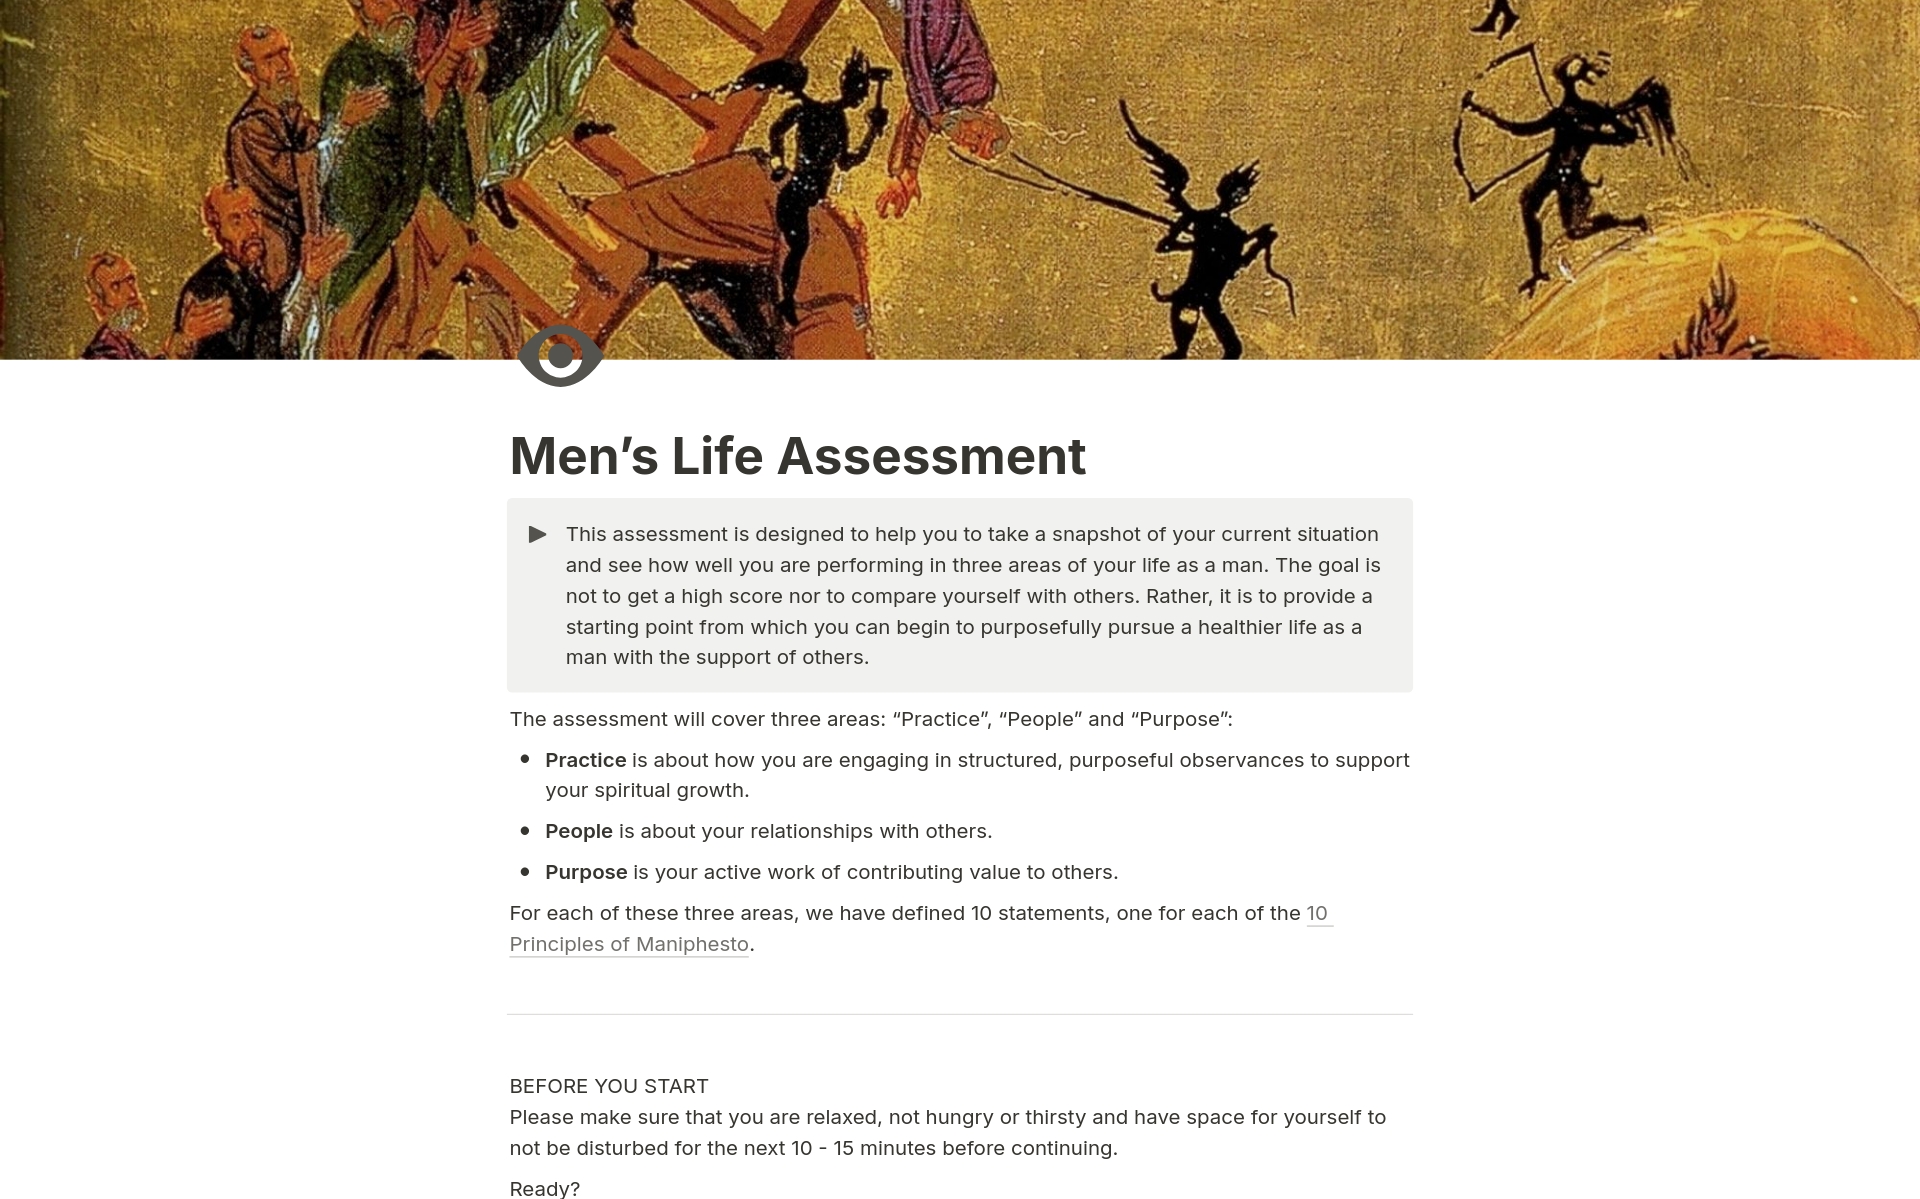 This assessment is designed to help you to take a snapshot of your current situation and see how well you are performing in three areas of your life as a man - practice, people and purpose. 